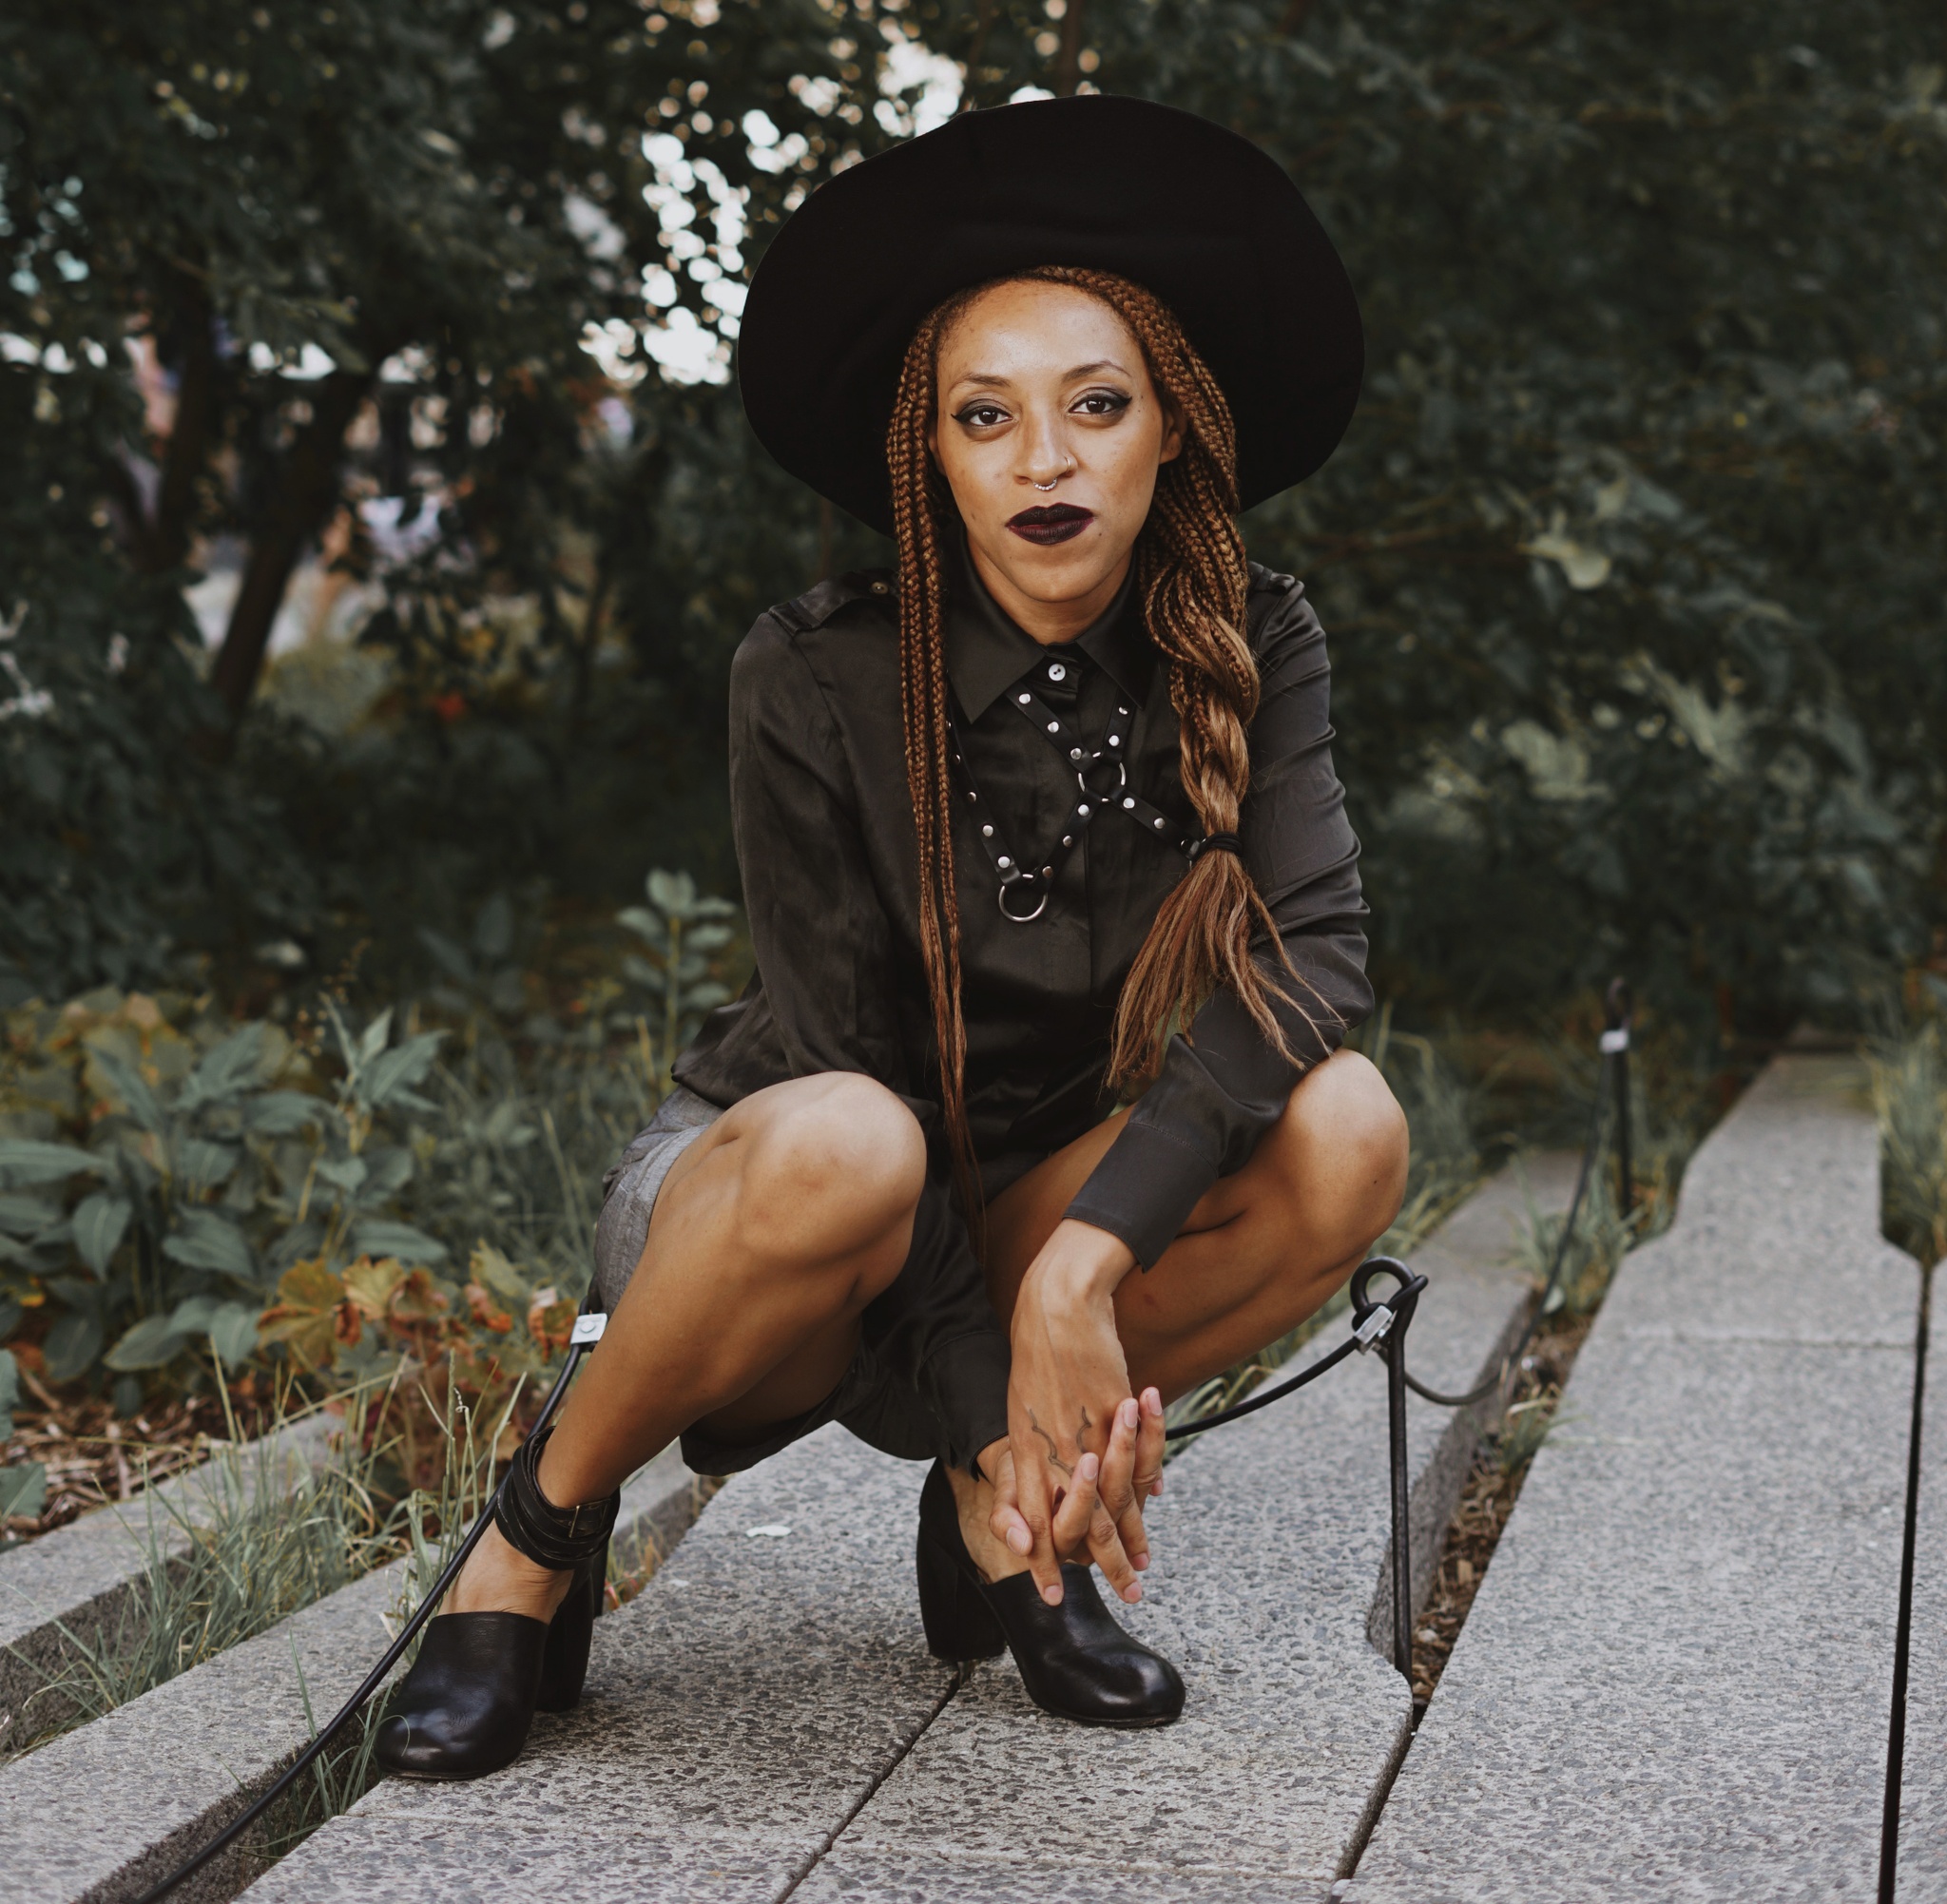 A photo of the artist Ayanna Dozier crouching on a concrete path in front of green trees, grass, and bushes. Dozier wears a wide-brimmed black hat over her long braided hair.